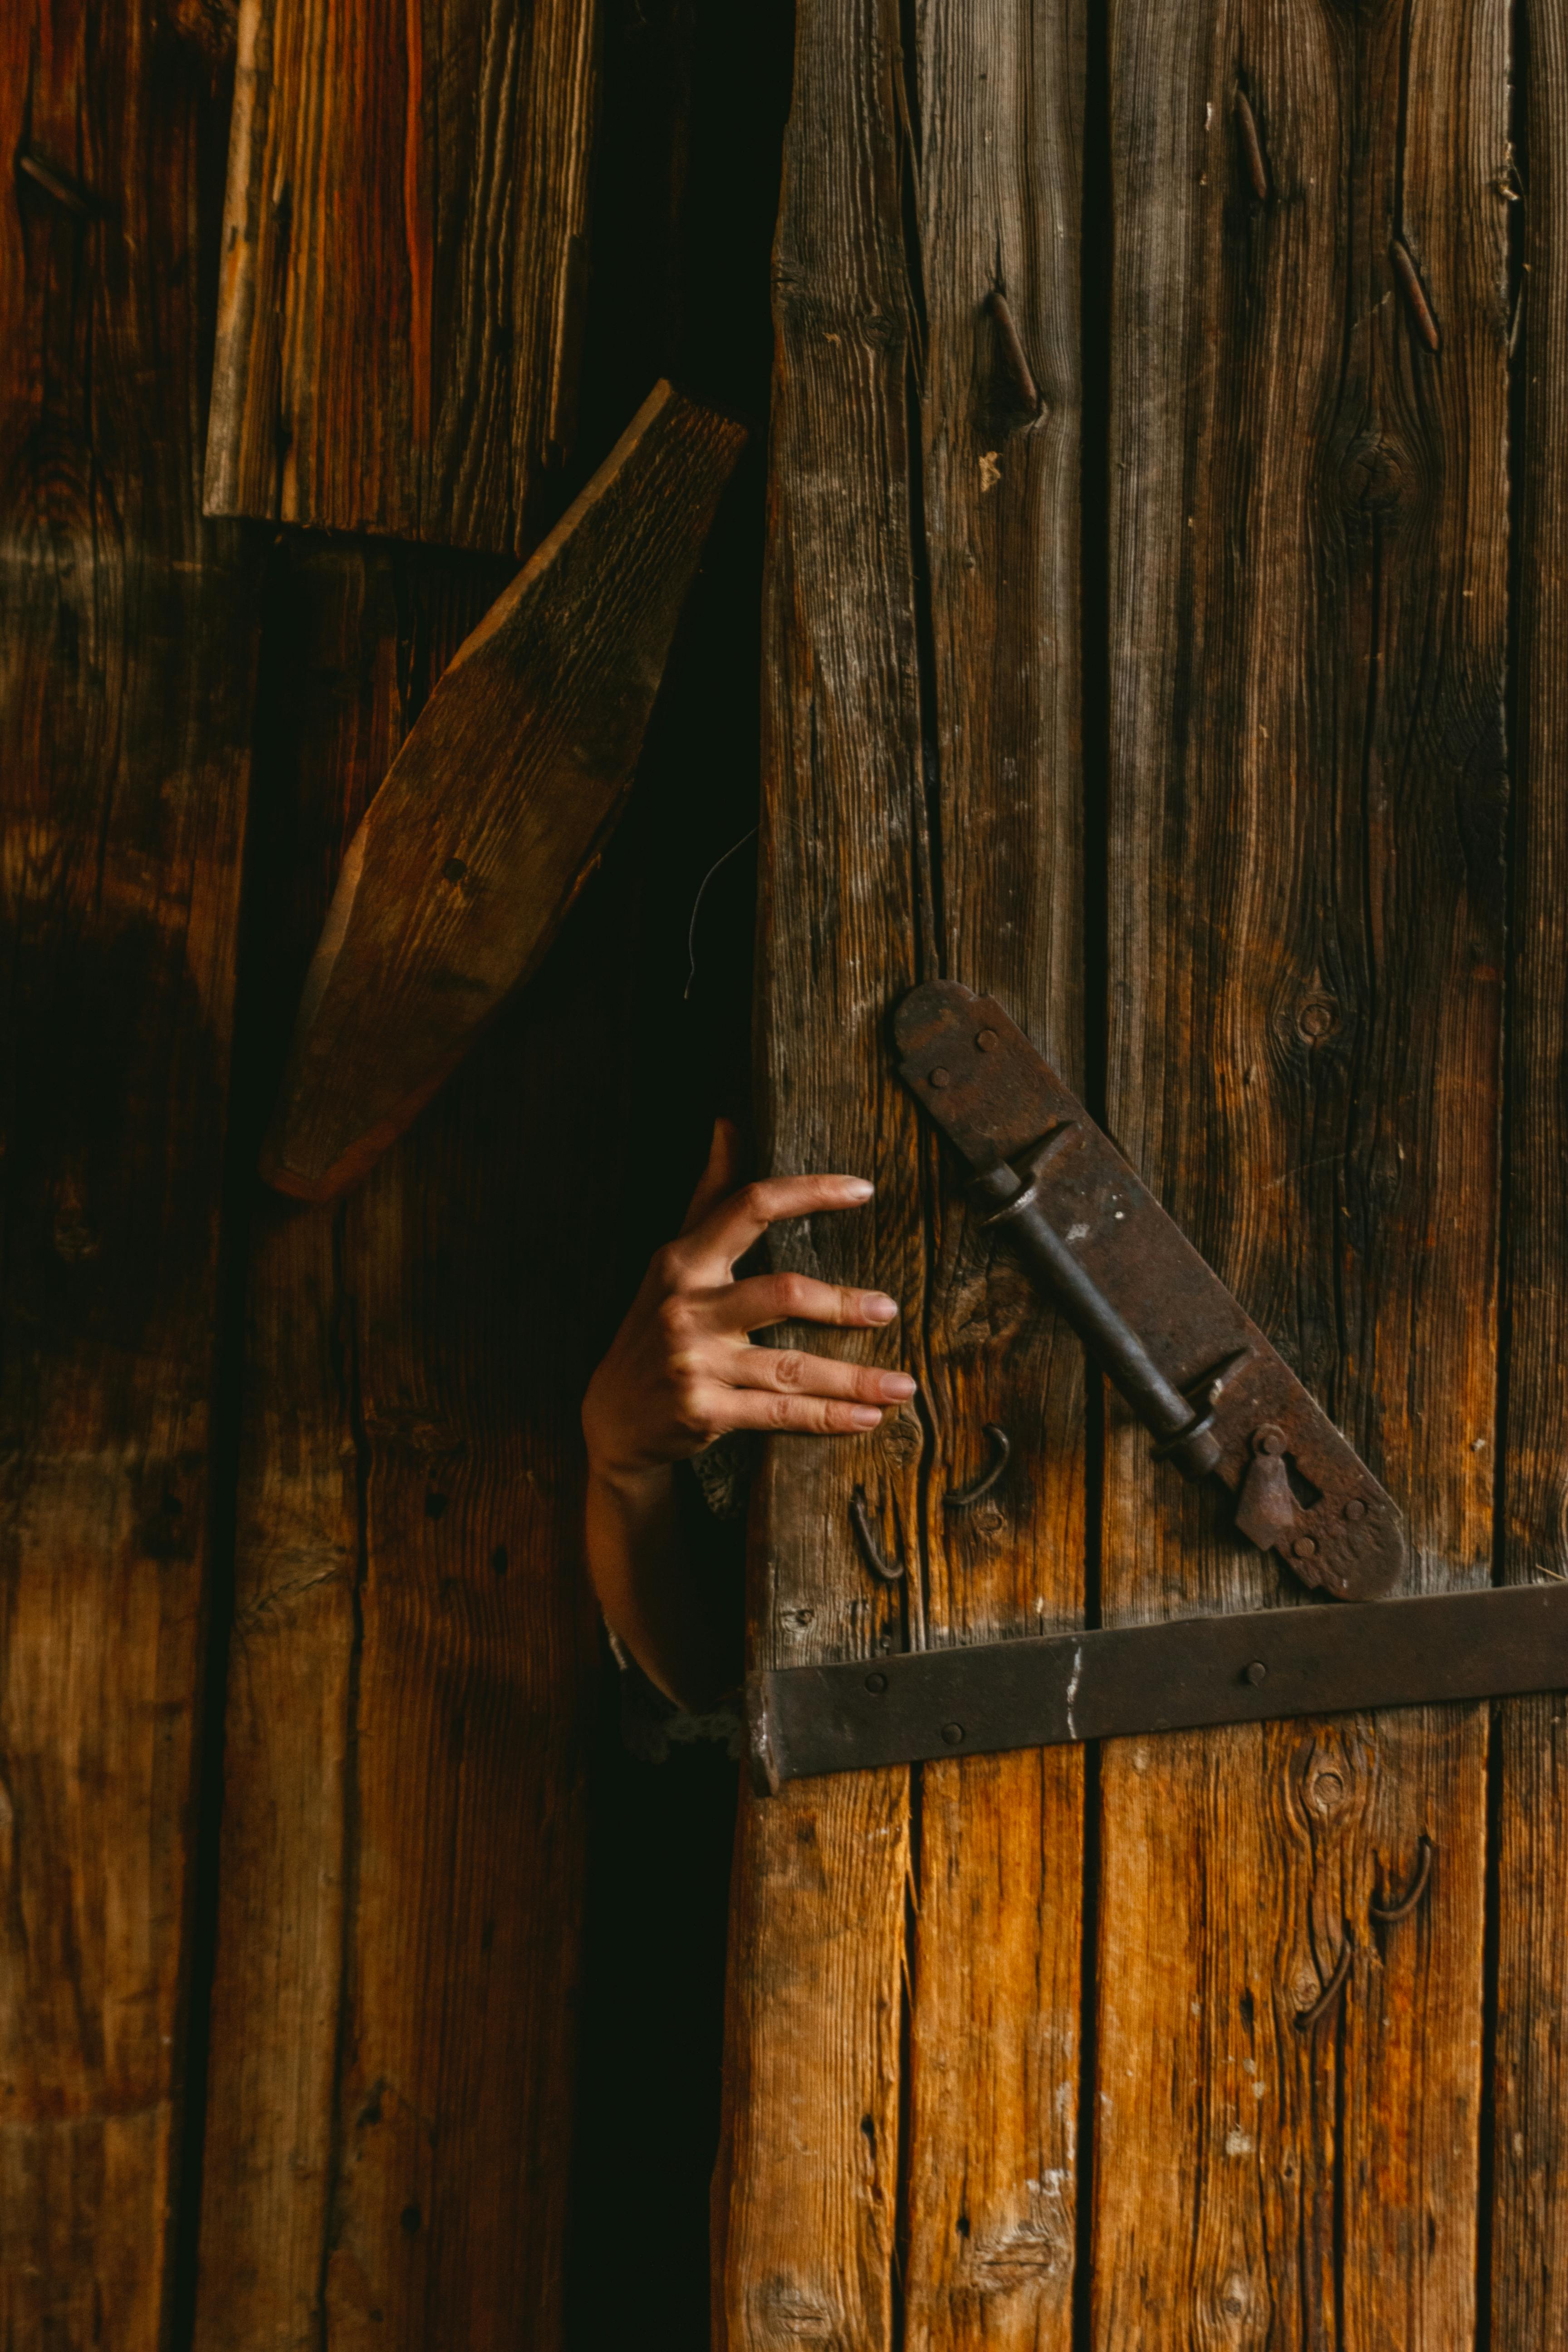 A hand opening a shed door | Source: Pexels